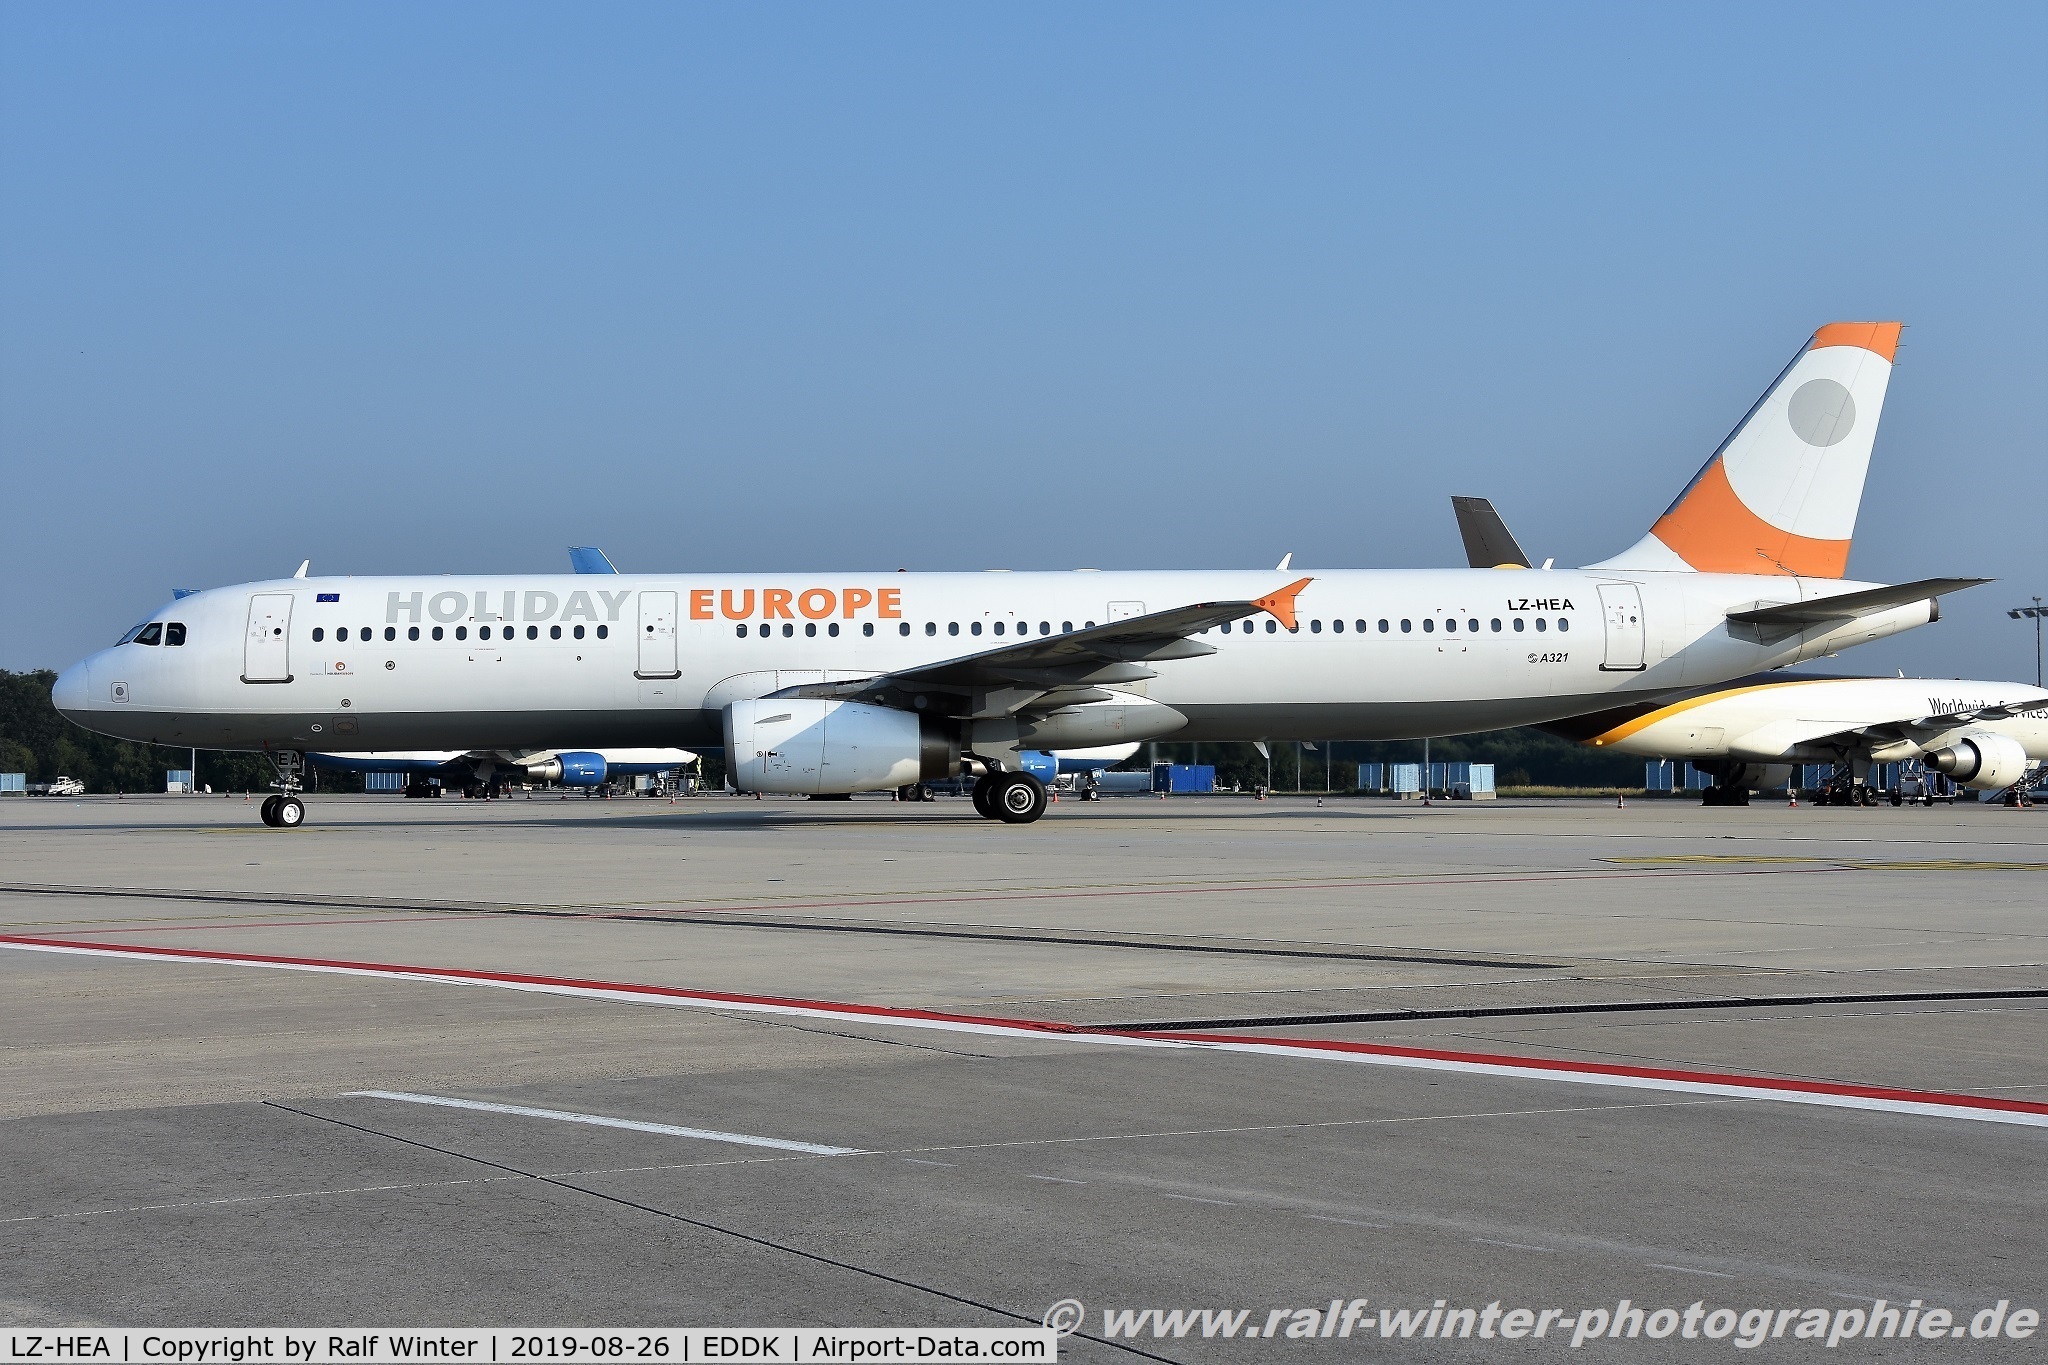 LZ-HEA, 1998 Airbus A321-231 C/N 811, Airbus A321-231 - HES Holiday Europe - 811 - LZ-HEA - 26.08.2019 - CGN